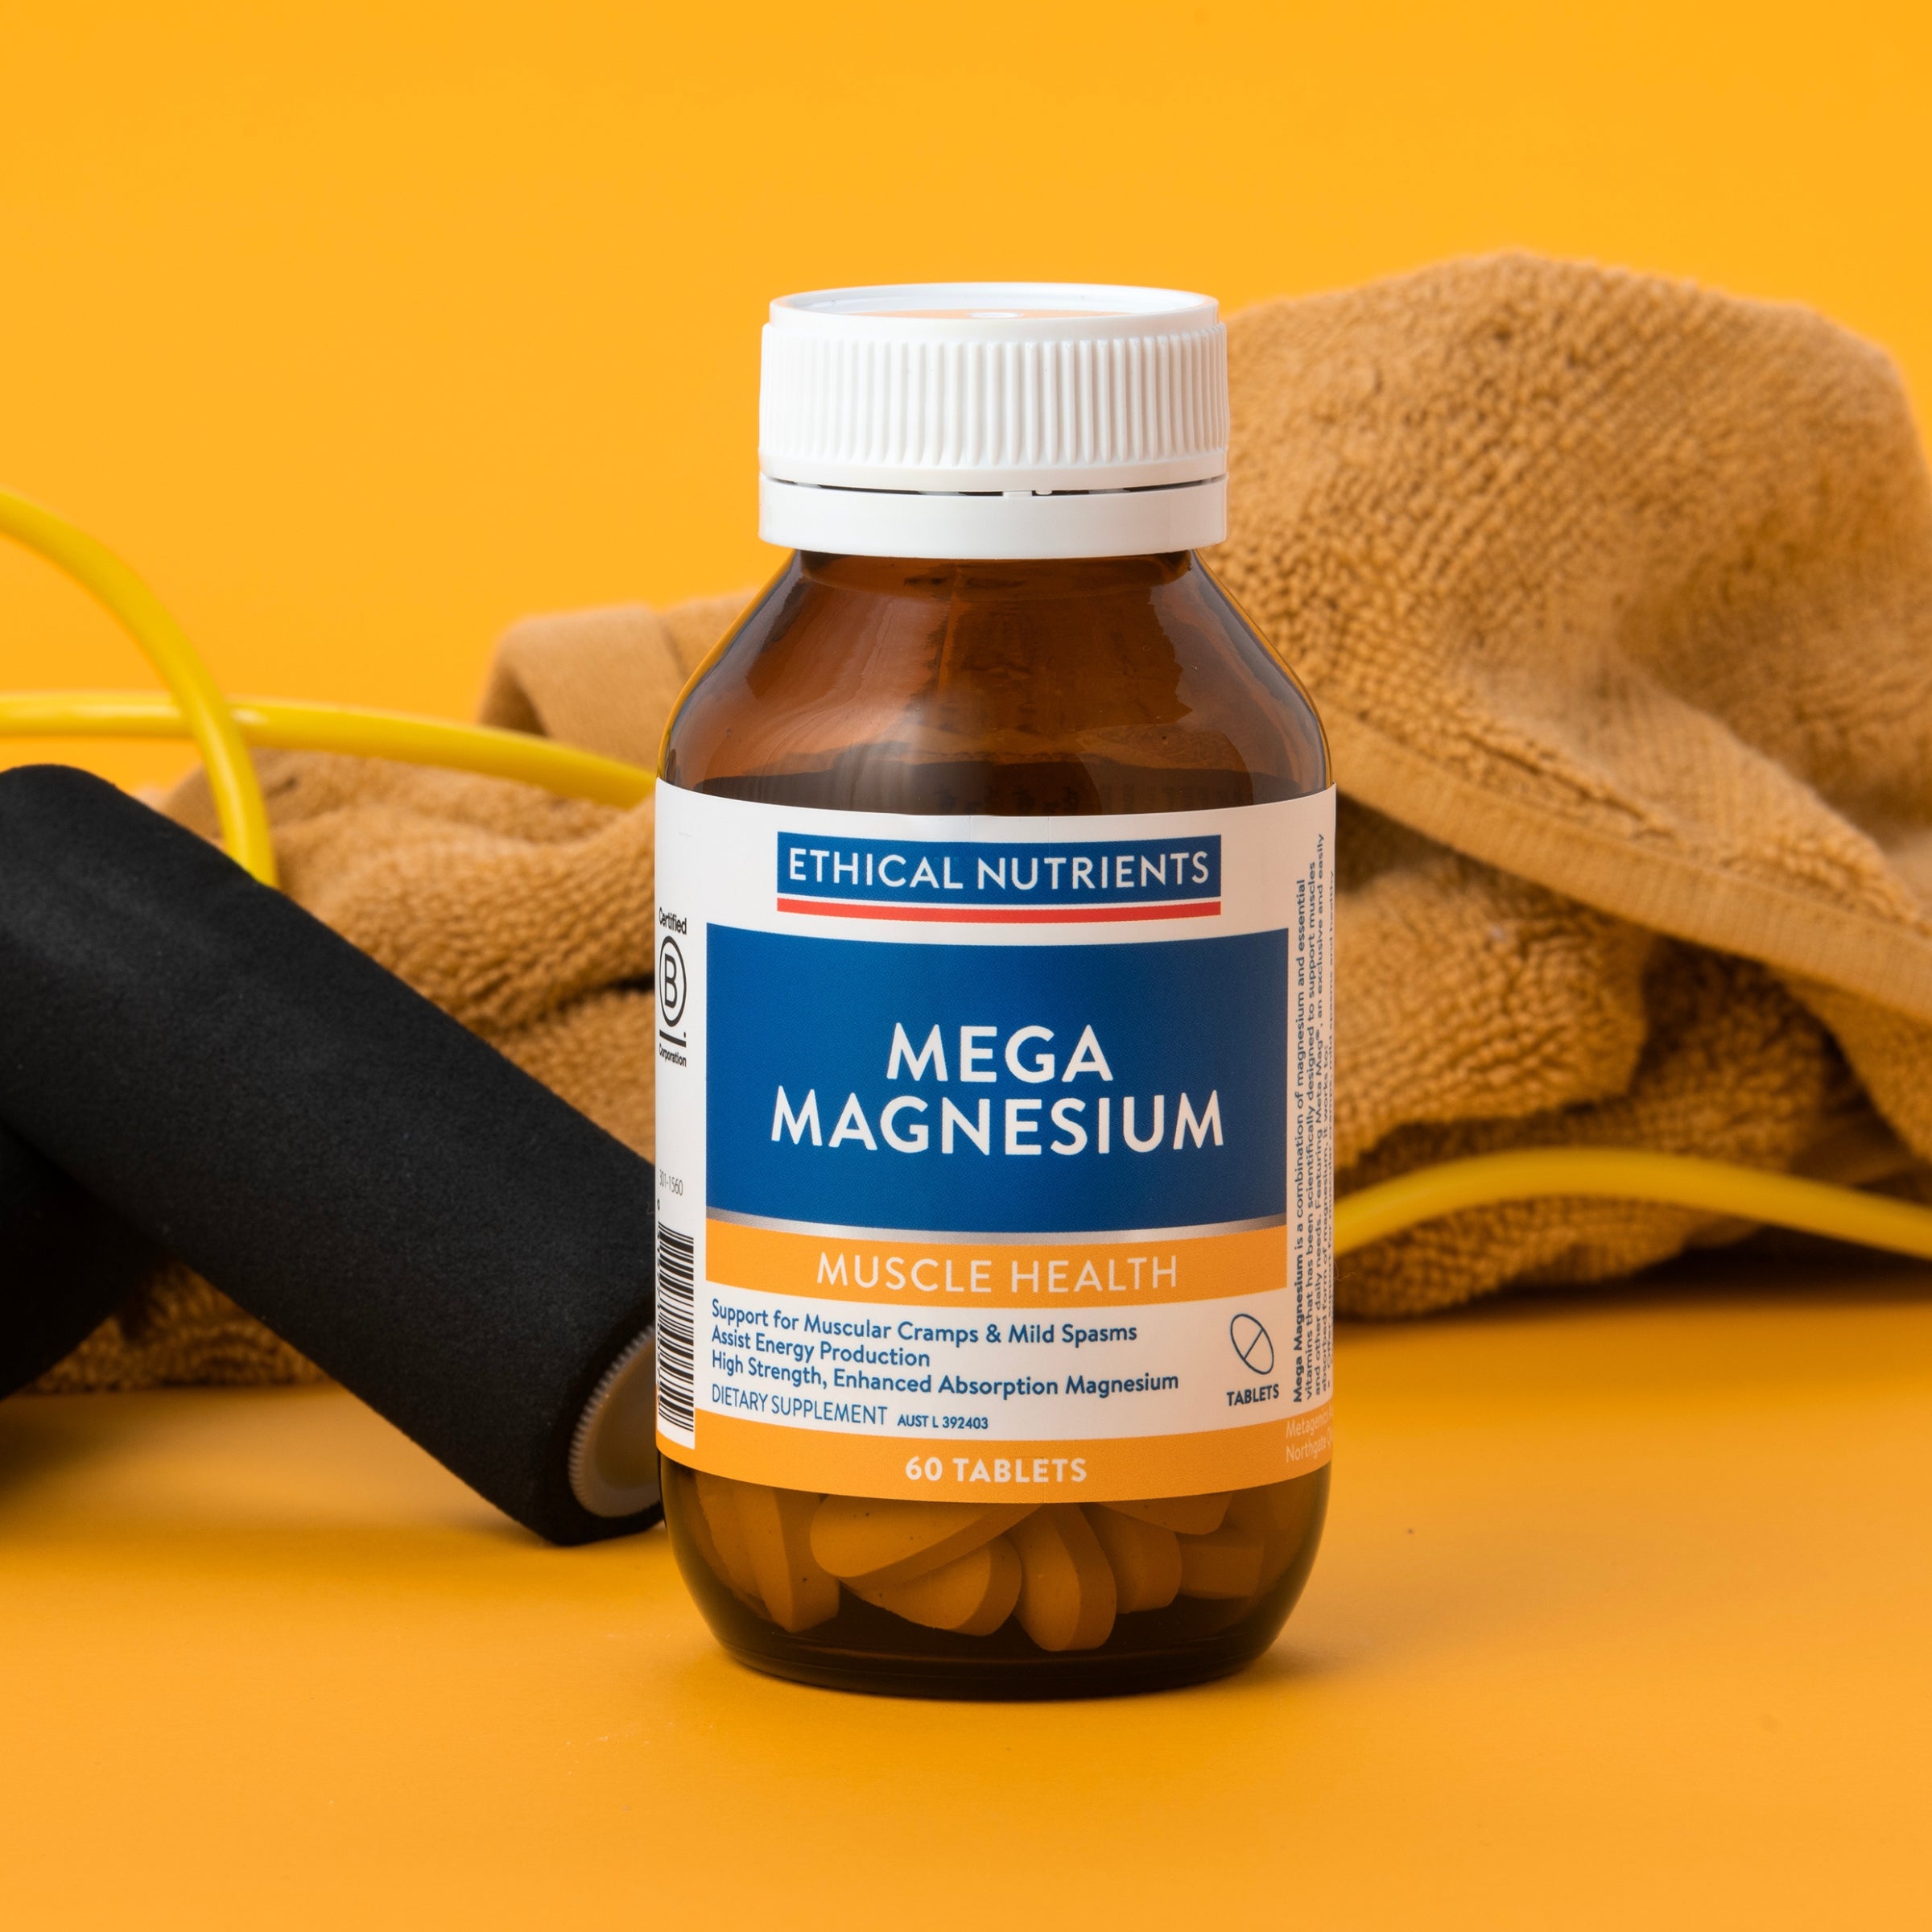 Ethical Nutrients Mega Magnesium 60 Tablets #size_60 tablets